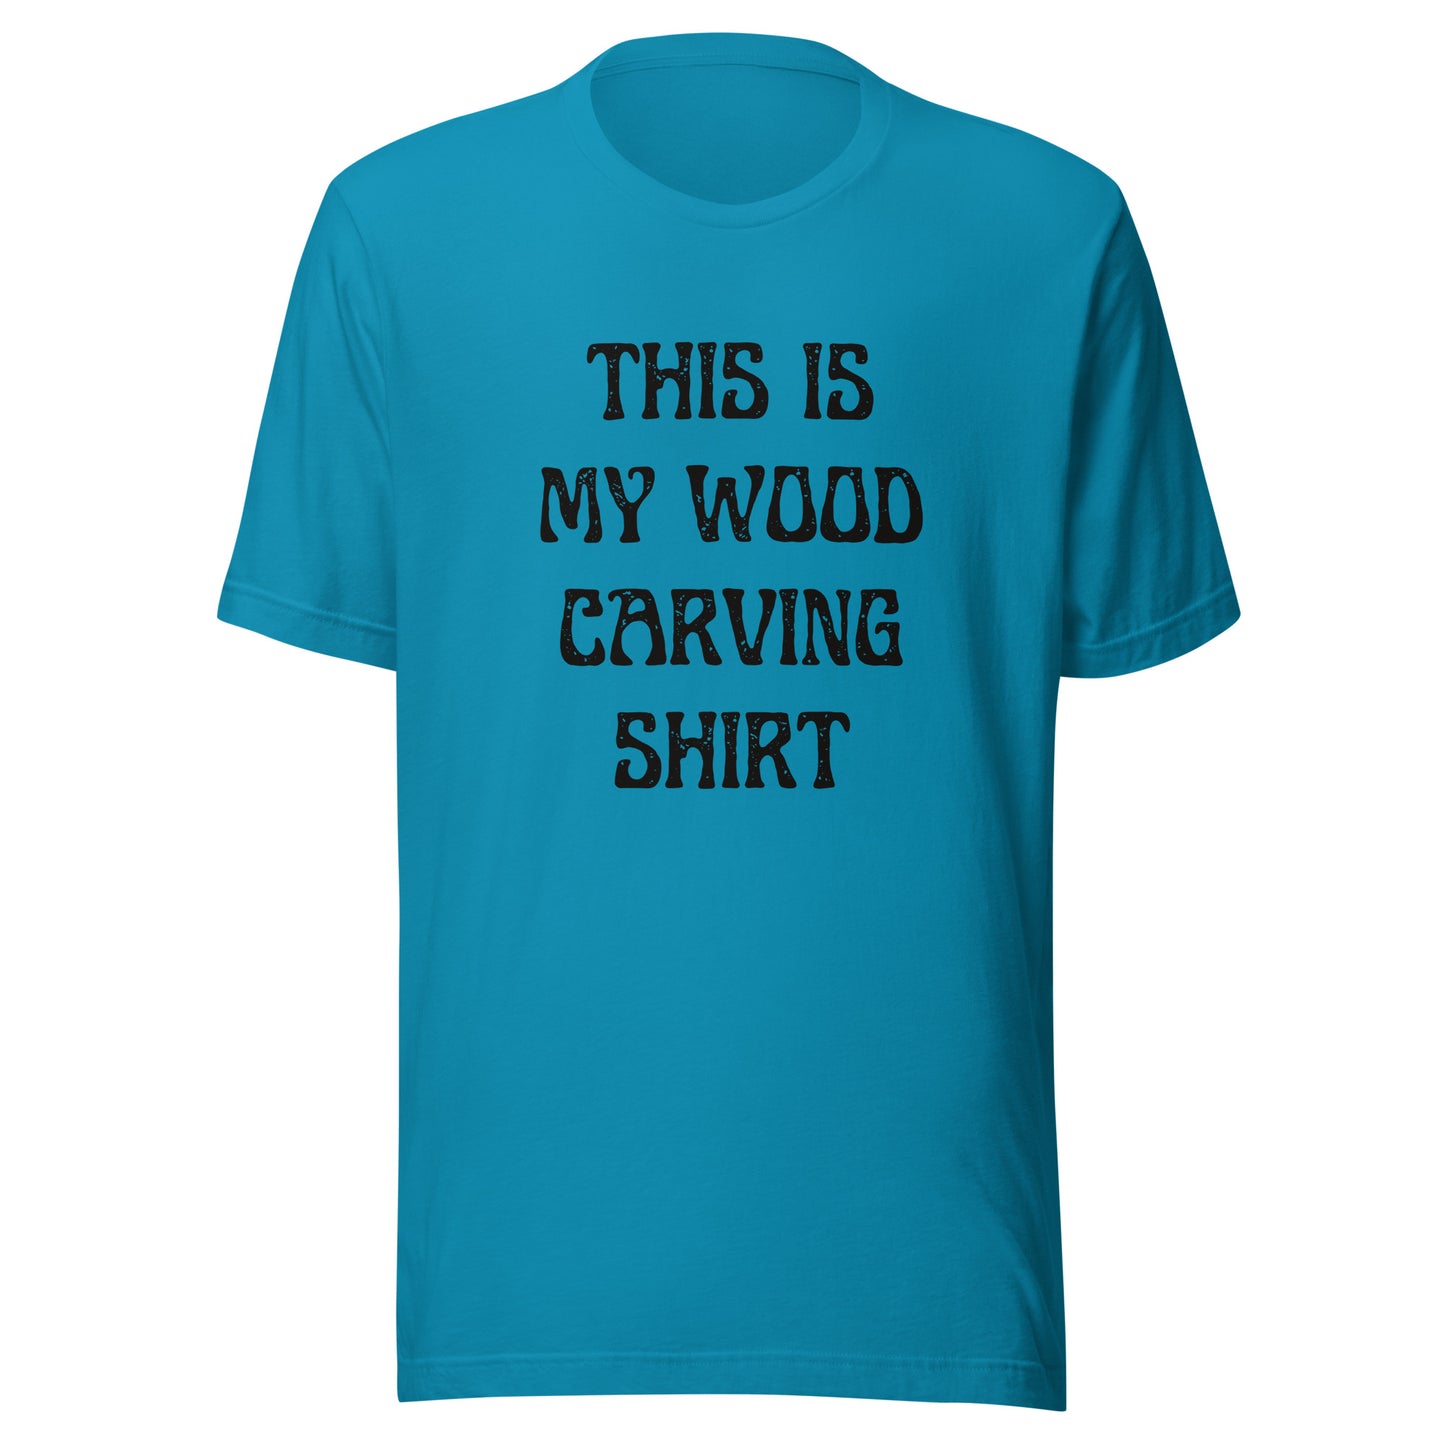 This is My Wood Carving Shirt - Unisex t-shirt - Light Colors